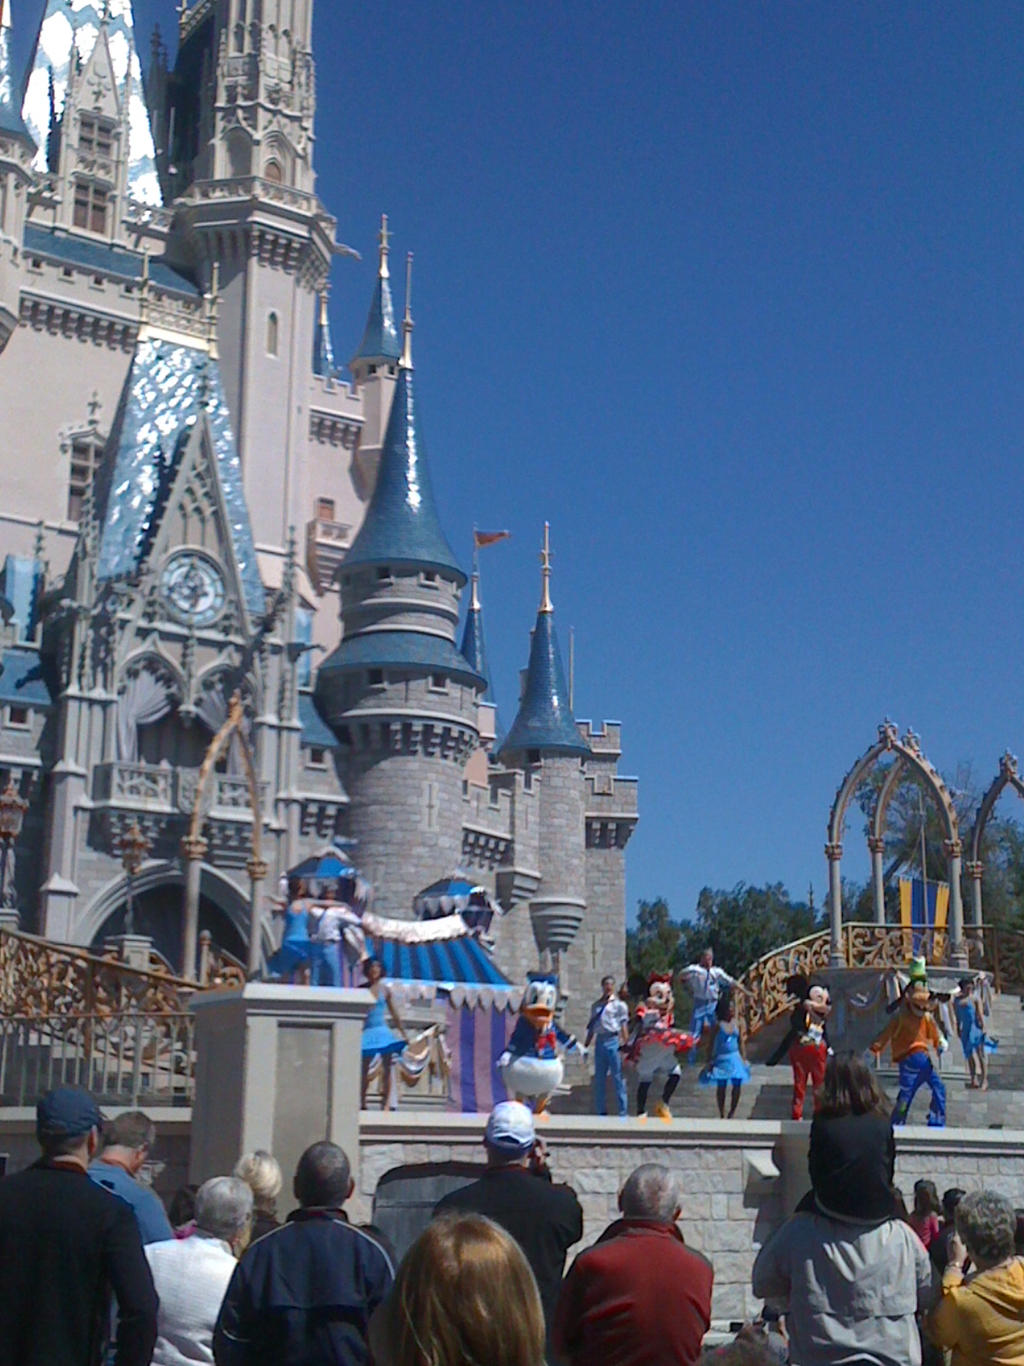 Vacation on Florida: A trip to Disney part 2